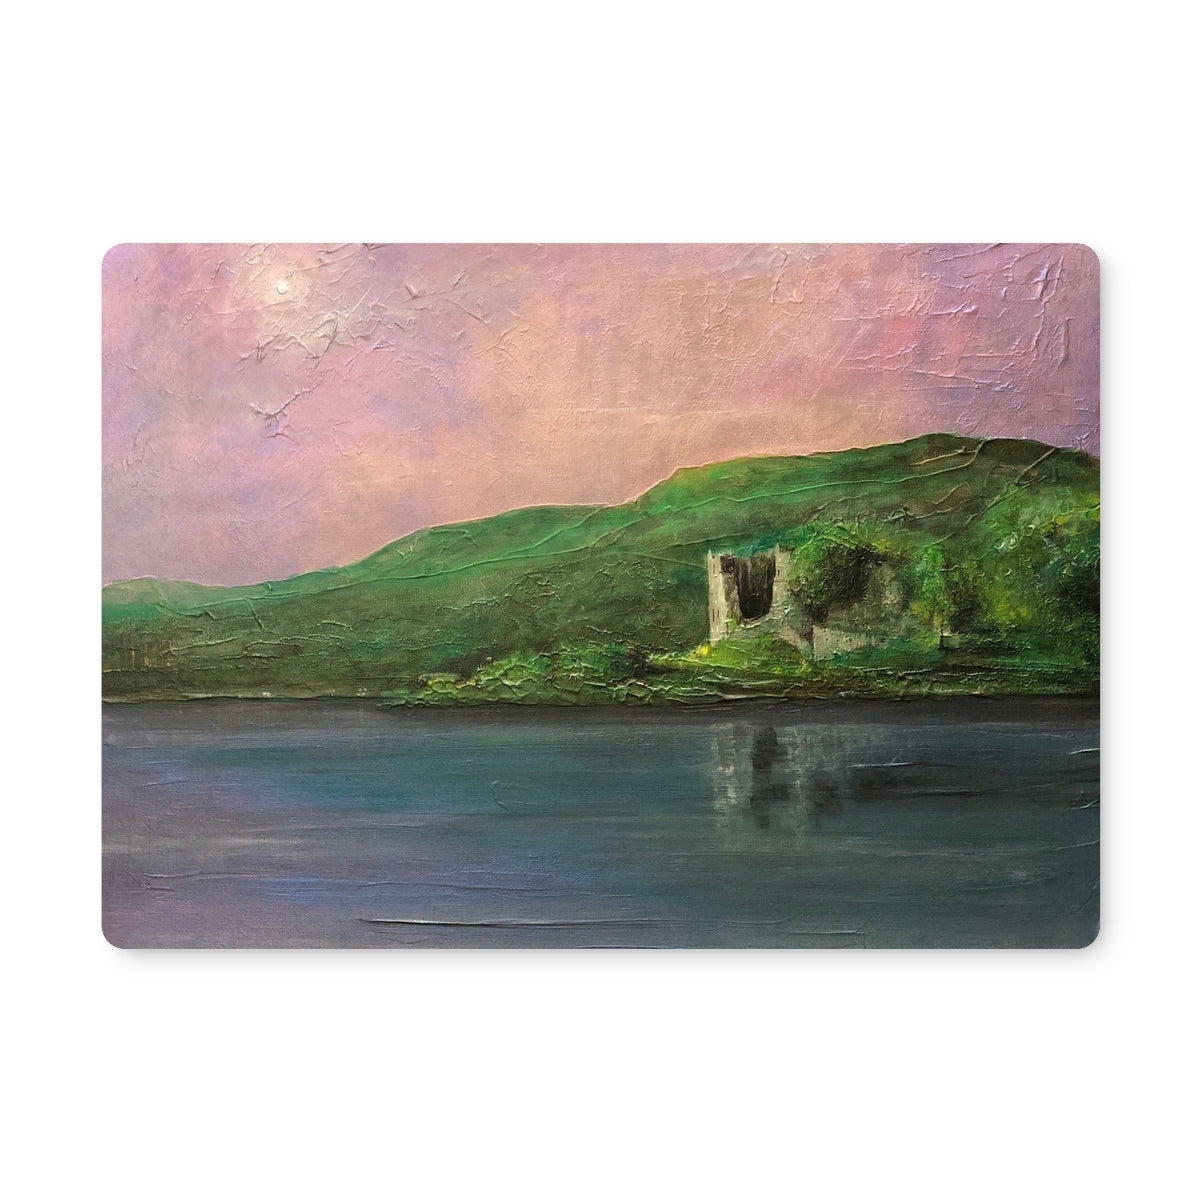 Old Castle Lachlan Art Gifts Placemat-Placemats-Historic & Iconic Scotland Art Gallery-Single Placemat-Paintings, Prints, Homeware, Art Gifts From Scotland By Scottish Artist Kevin Hunter